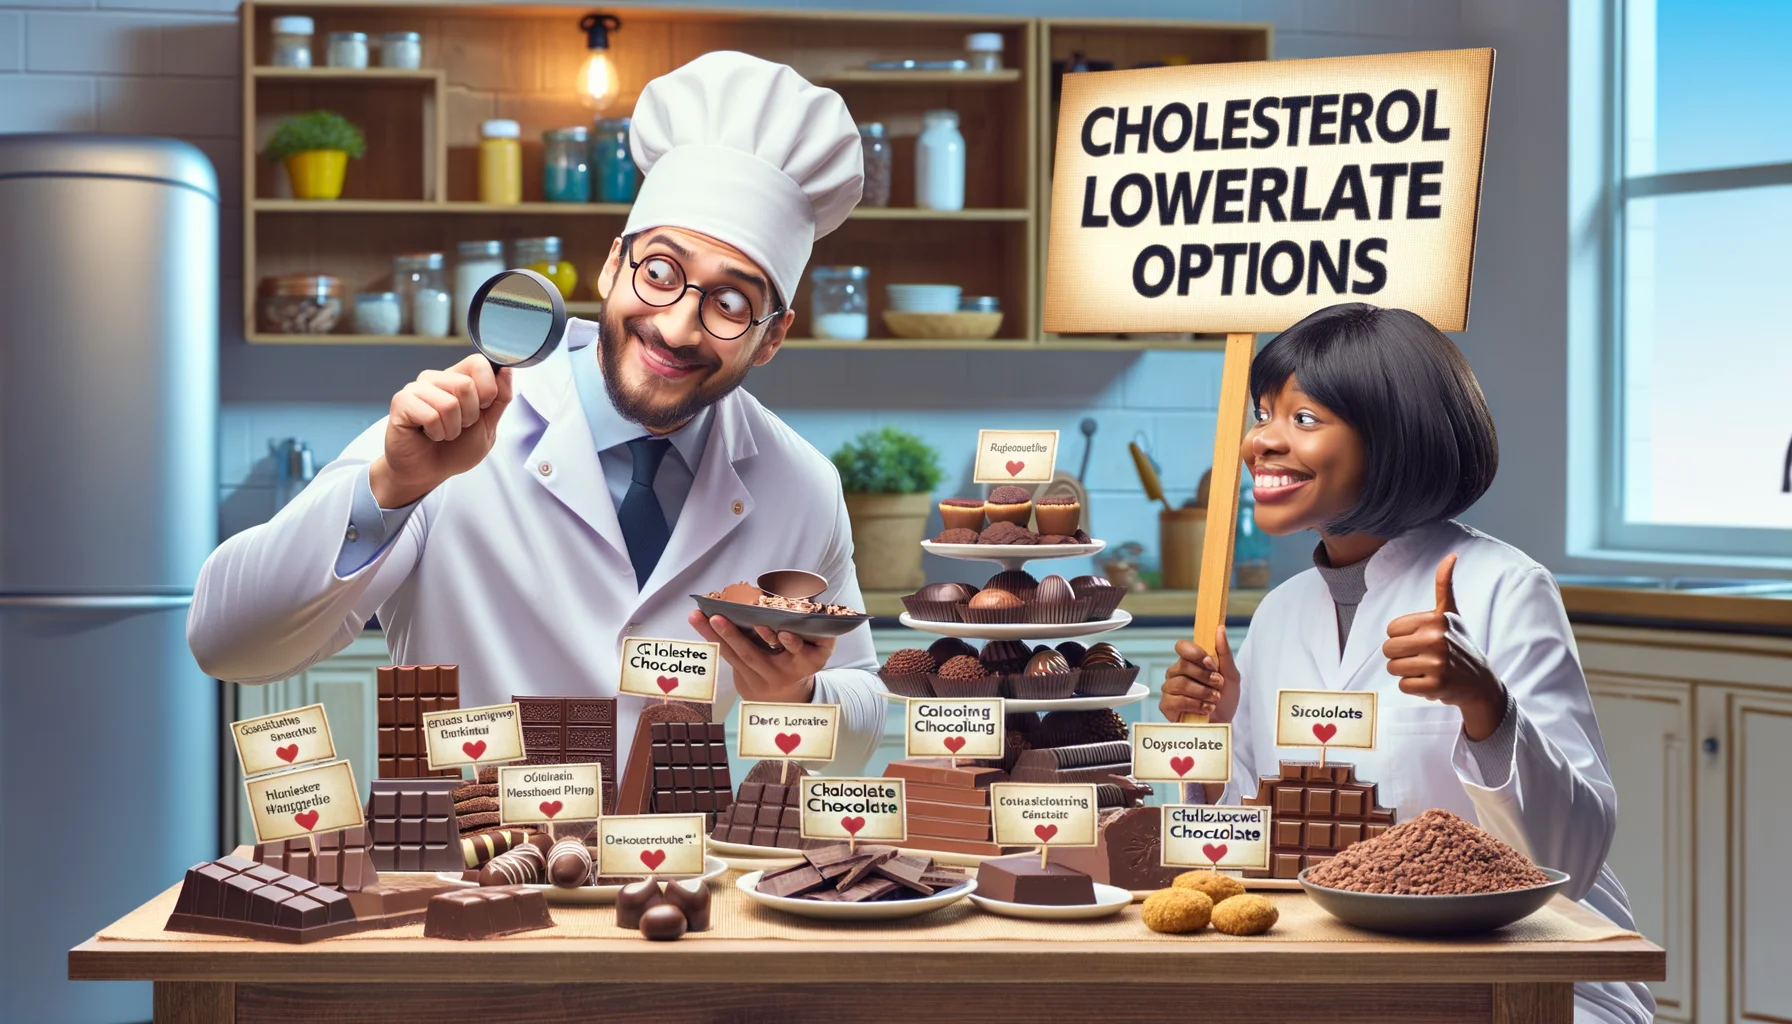 Imagine a humorous and realistic scenario centering on 'Cholesterol-Lowering Chocolate Options'. The image includes a collection of various types of chocolate bars and treats labelled with banners that reflects their heart-healthy properties. On one side, a white male nutritionist with a bemused expression is examining the chocolate through a magnifying glass. On the other side, a Black female cardiologist, smiling, is giving a thumbs up. The setting is a brightly lit, modern kitchen, filled with various health-conscious paraphernalia. Both persons are dressed in their professional attire to add a touch of authenticity to this perfect scenario.